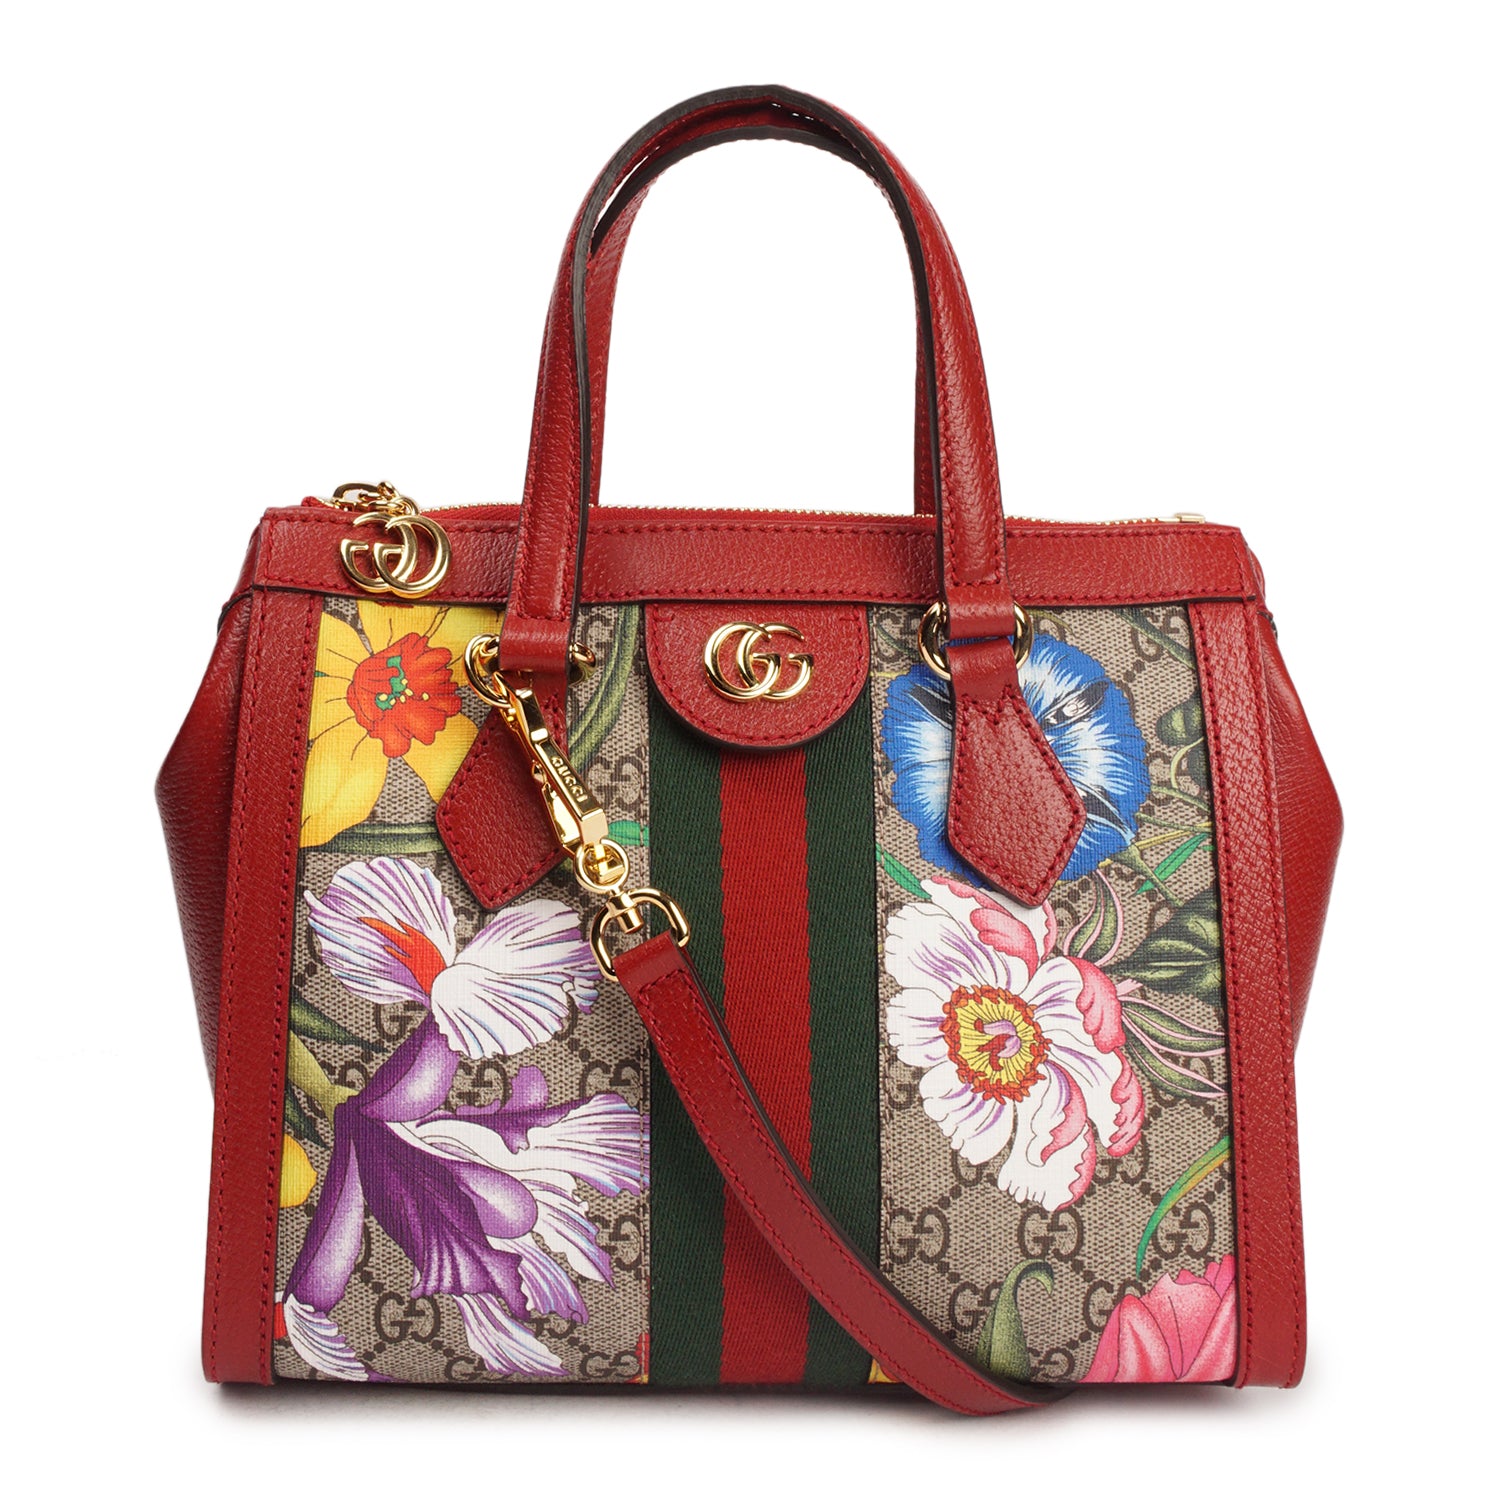 GUCCI OPHIDIA GG FLORA SMALL TOTE BAG IN RED